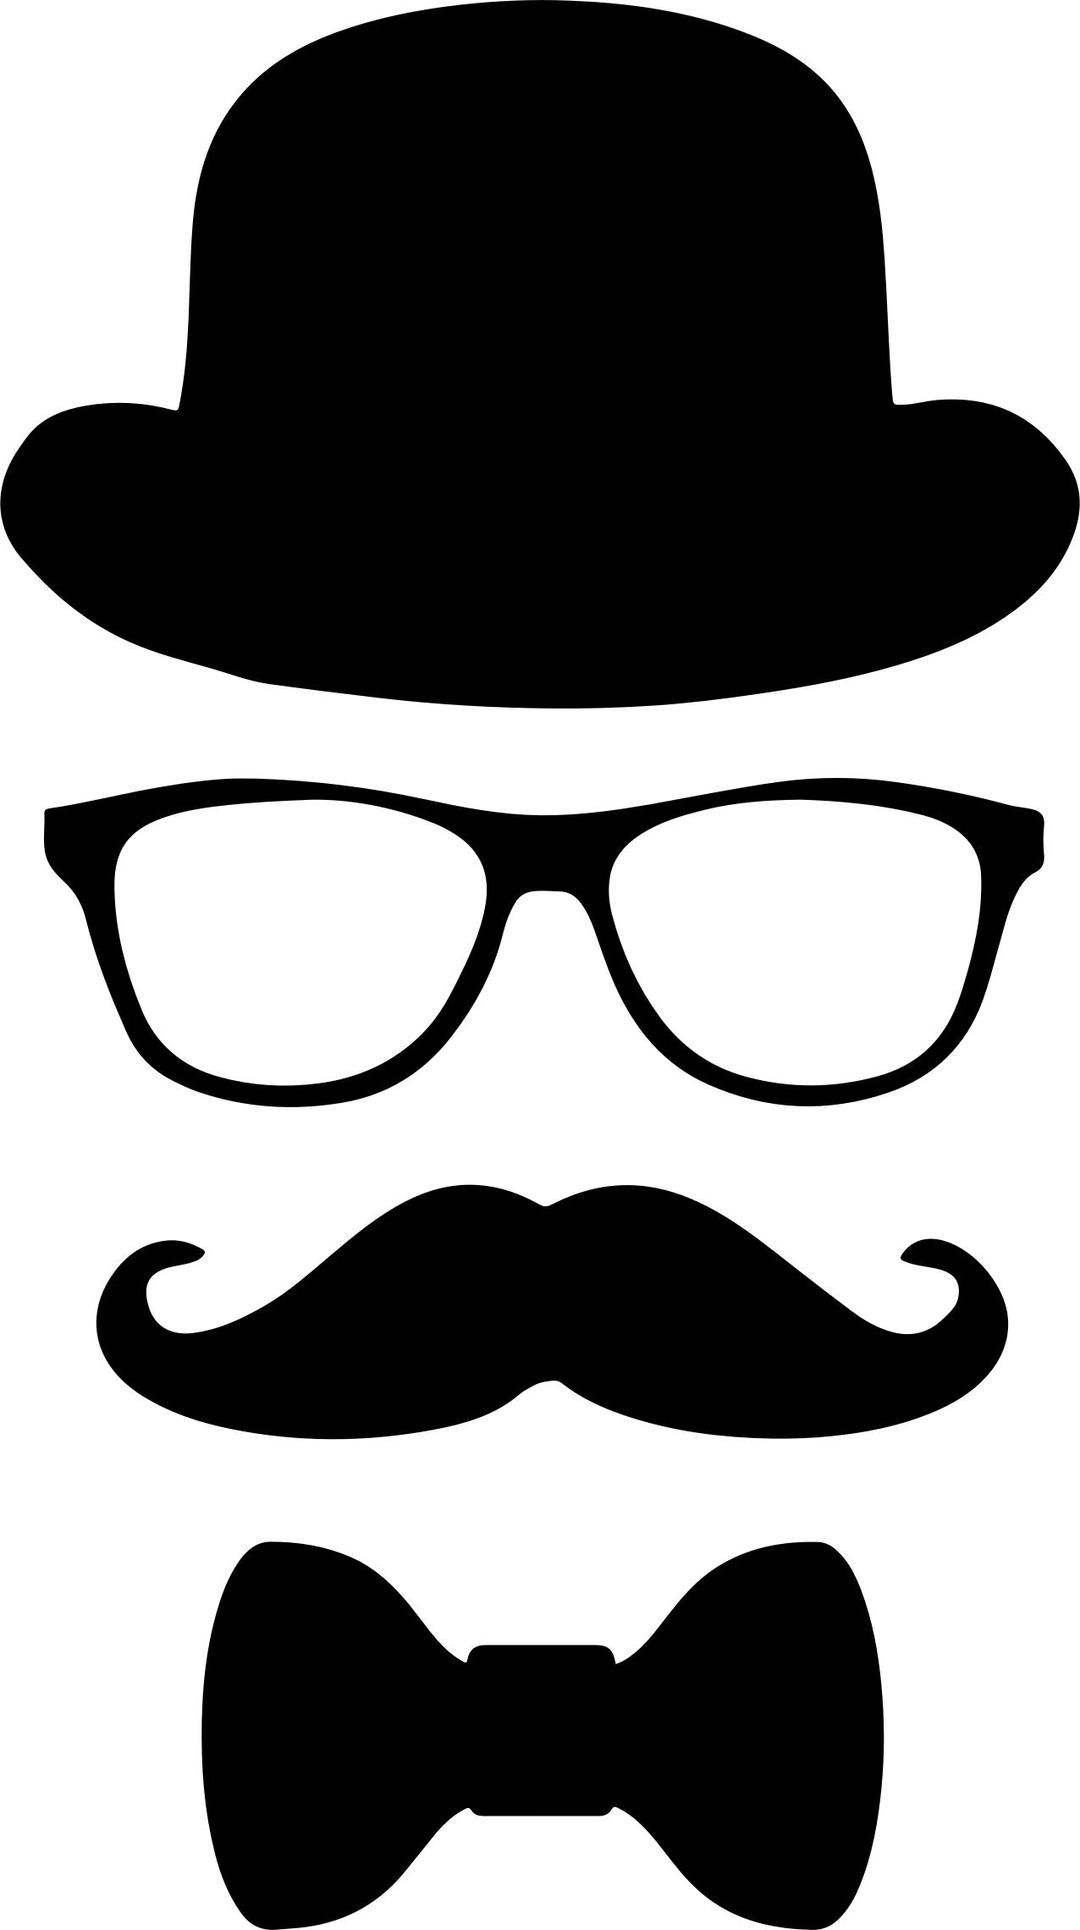 Man's Disguise png transparent